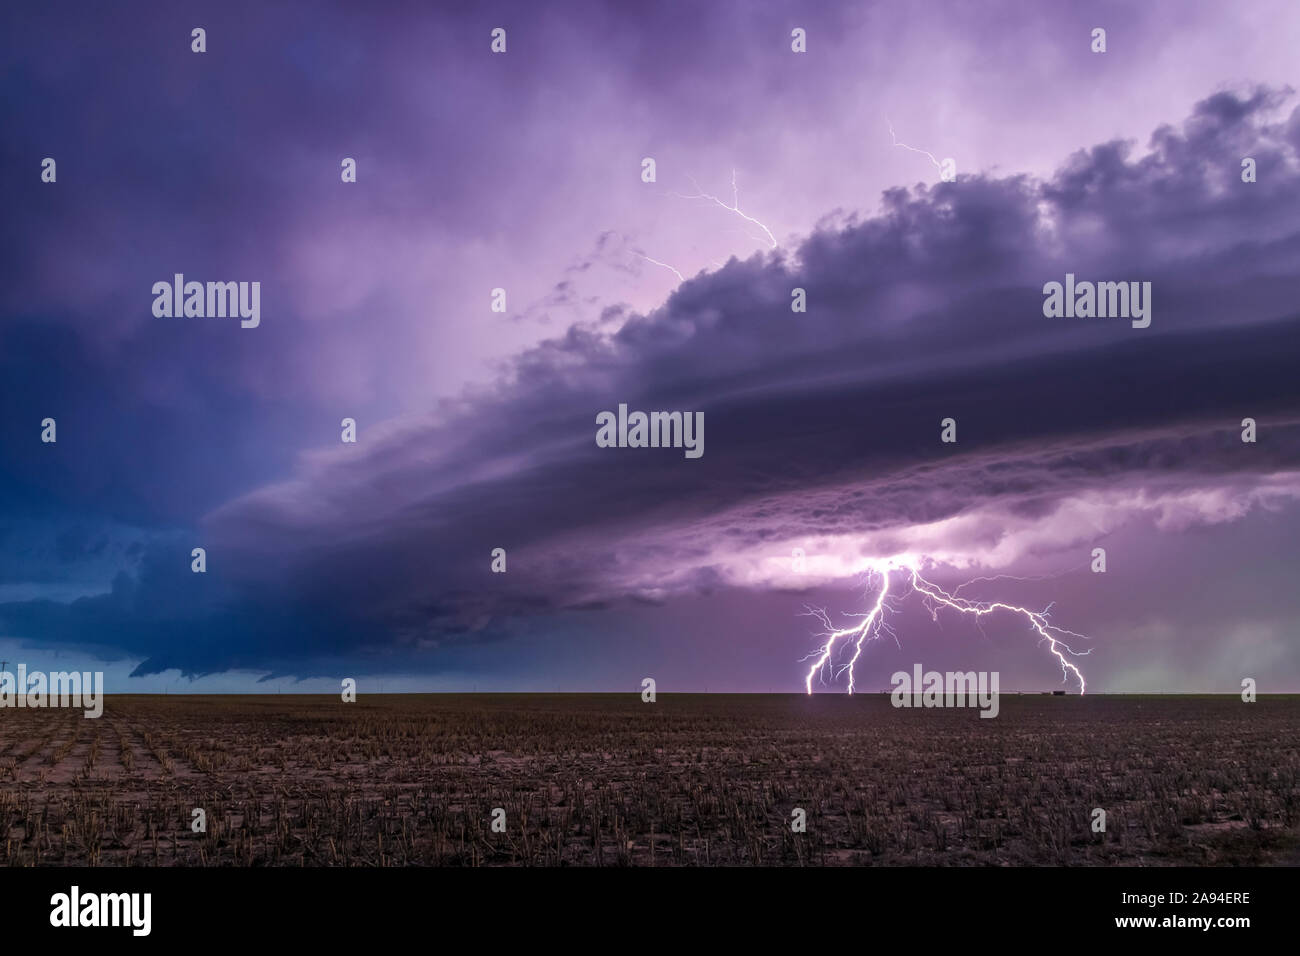 Dramatic storm clouds with forked lightning over farmland; Guymon, Oklahoma, United States of America Stock Photo